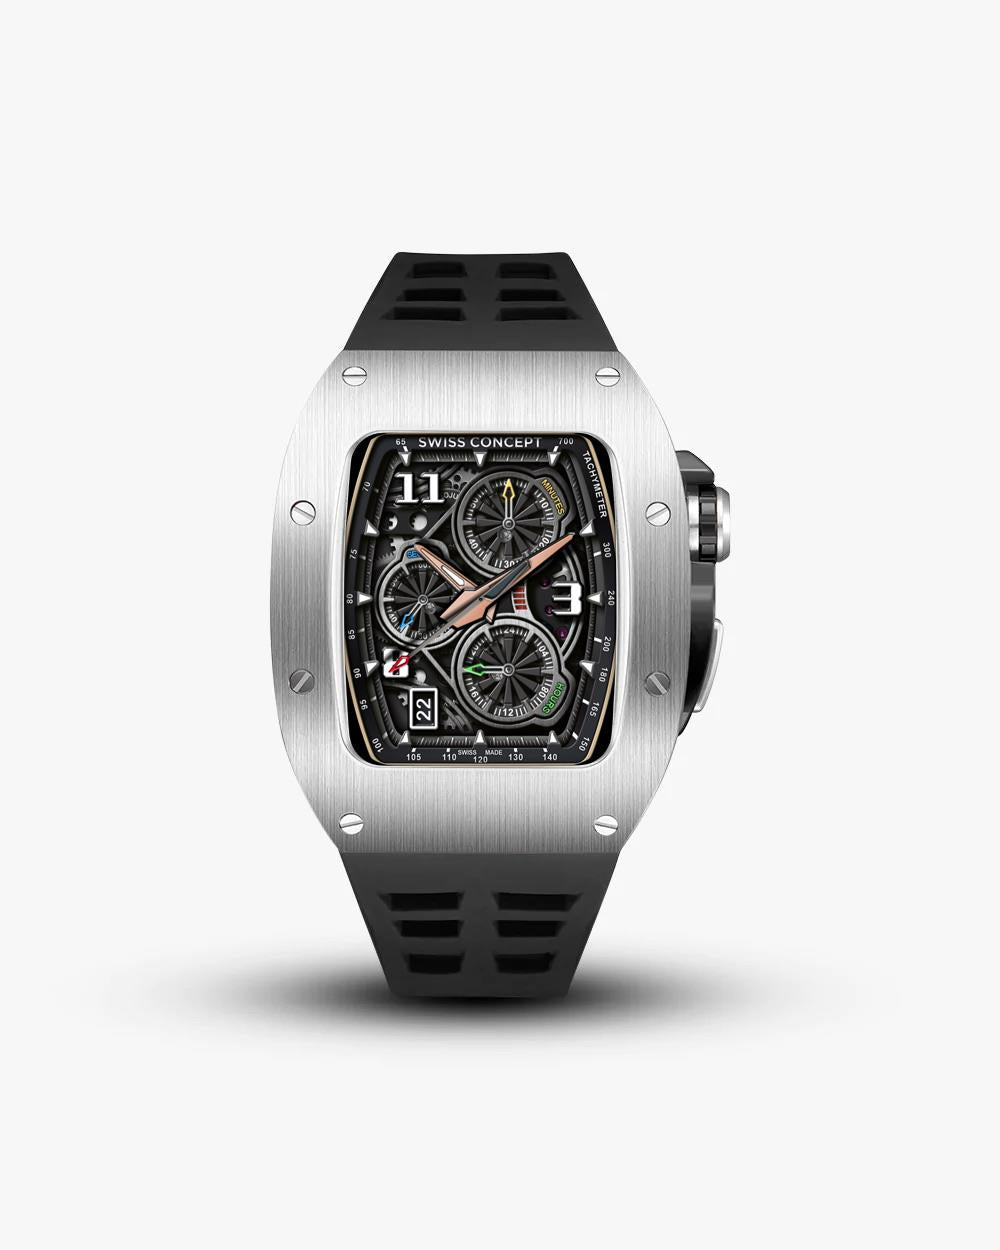 Swiss Concept Racing Pro Edition Stainless Steel & Onyx Black Apple Watch Case - Swiss Design